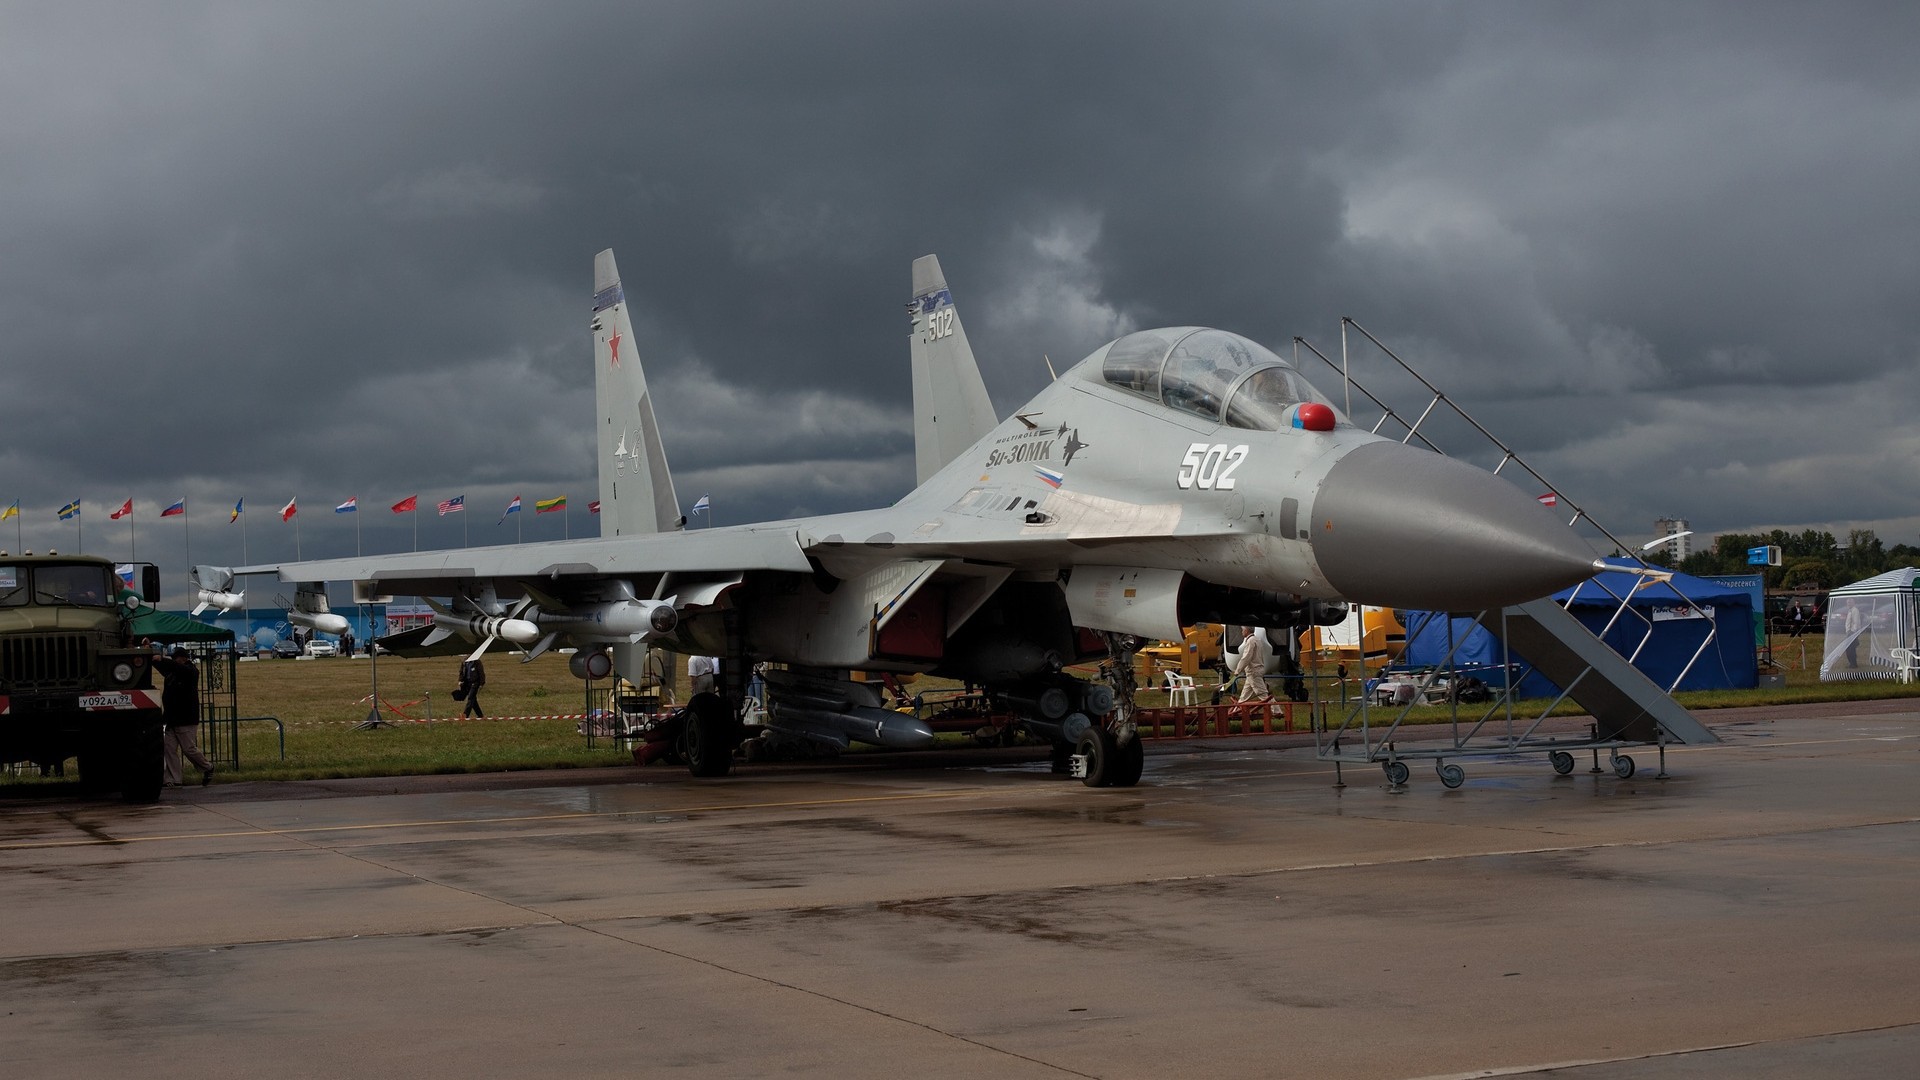 Russian military airplane SU 30 MK wallpapers and images   wallpapers